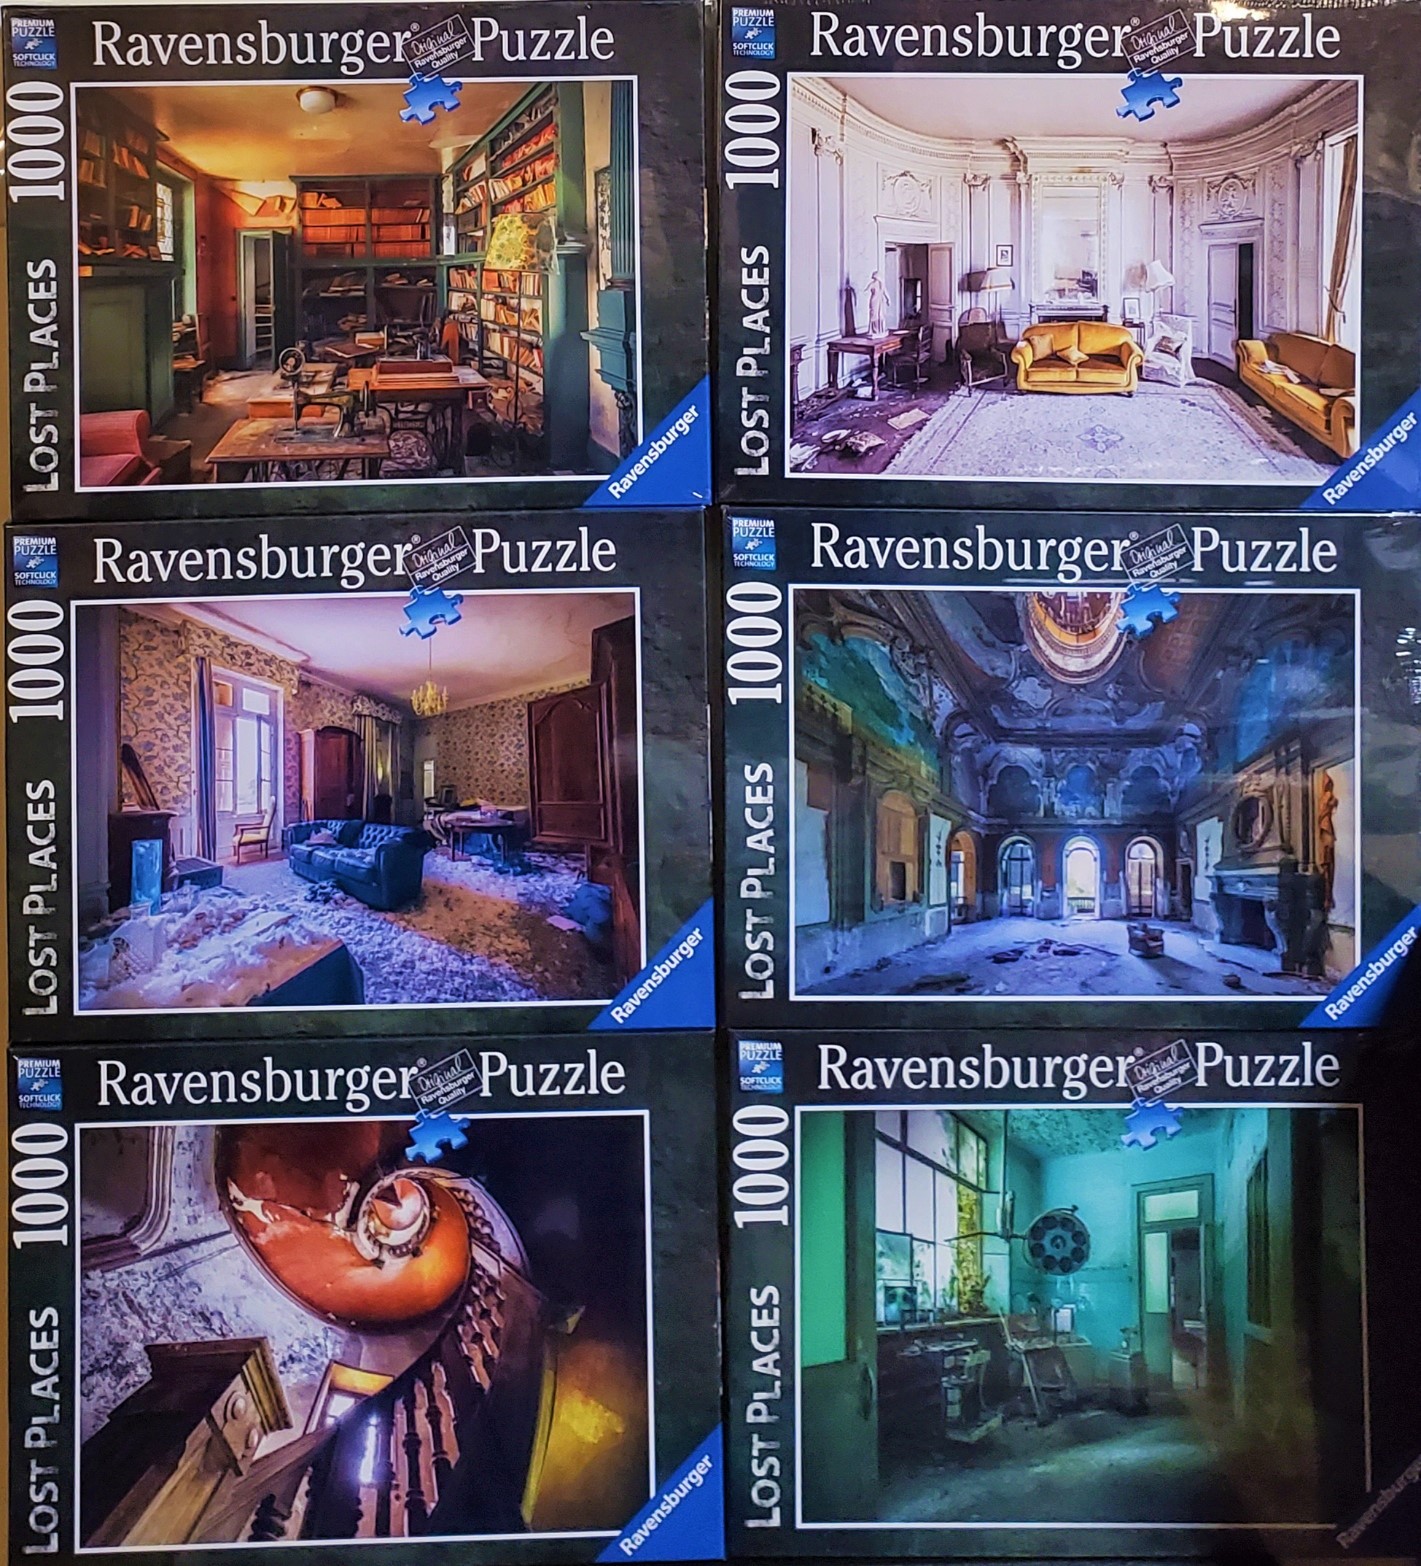 Ravensburger Abandoned Series Puzzle Review